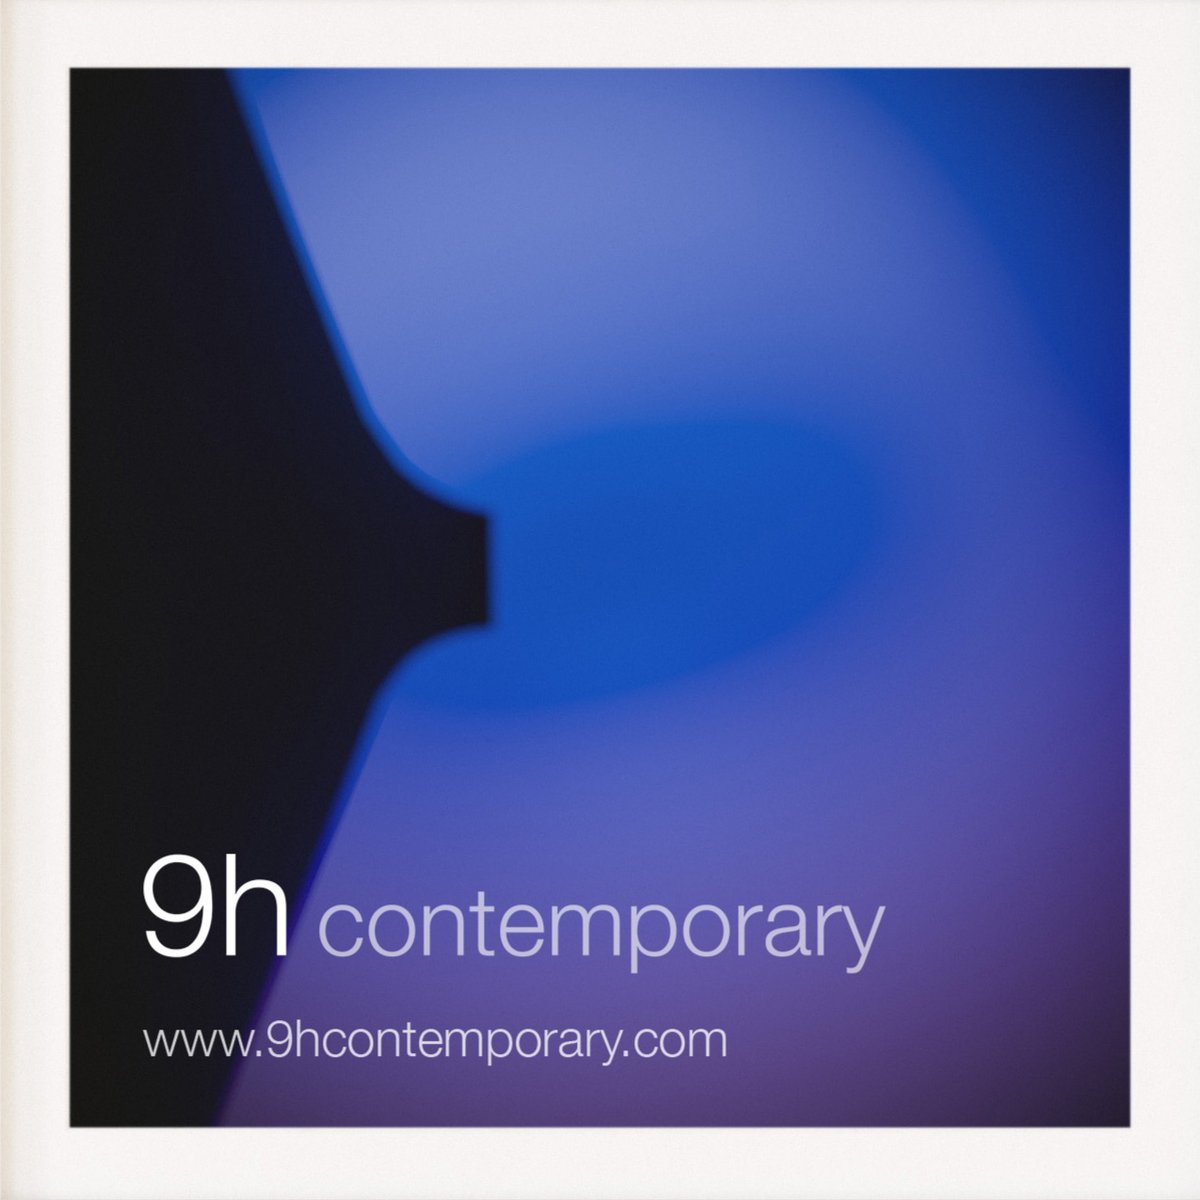 This original artwork explores the subtle interplay of colour and form. The resulting effect has an almost nocturnal quality, that blurs the boundary between photography and painting. #art #VisualArt #Original #NewArtist #artgallery 9hcontemporary.com